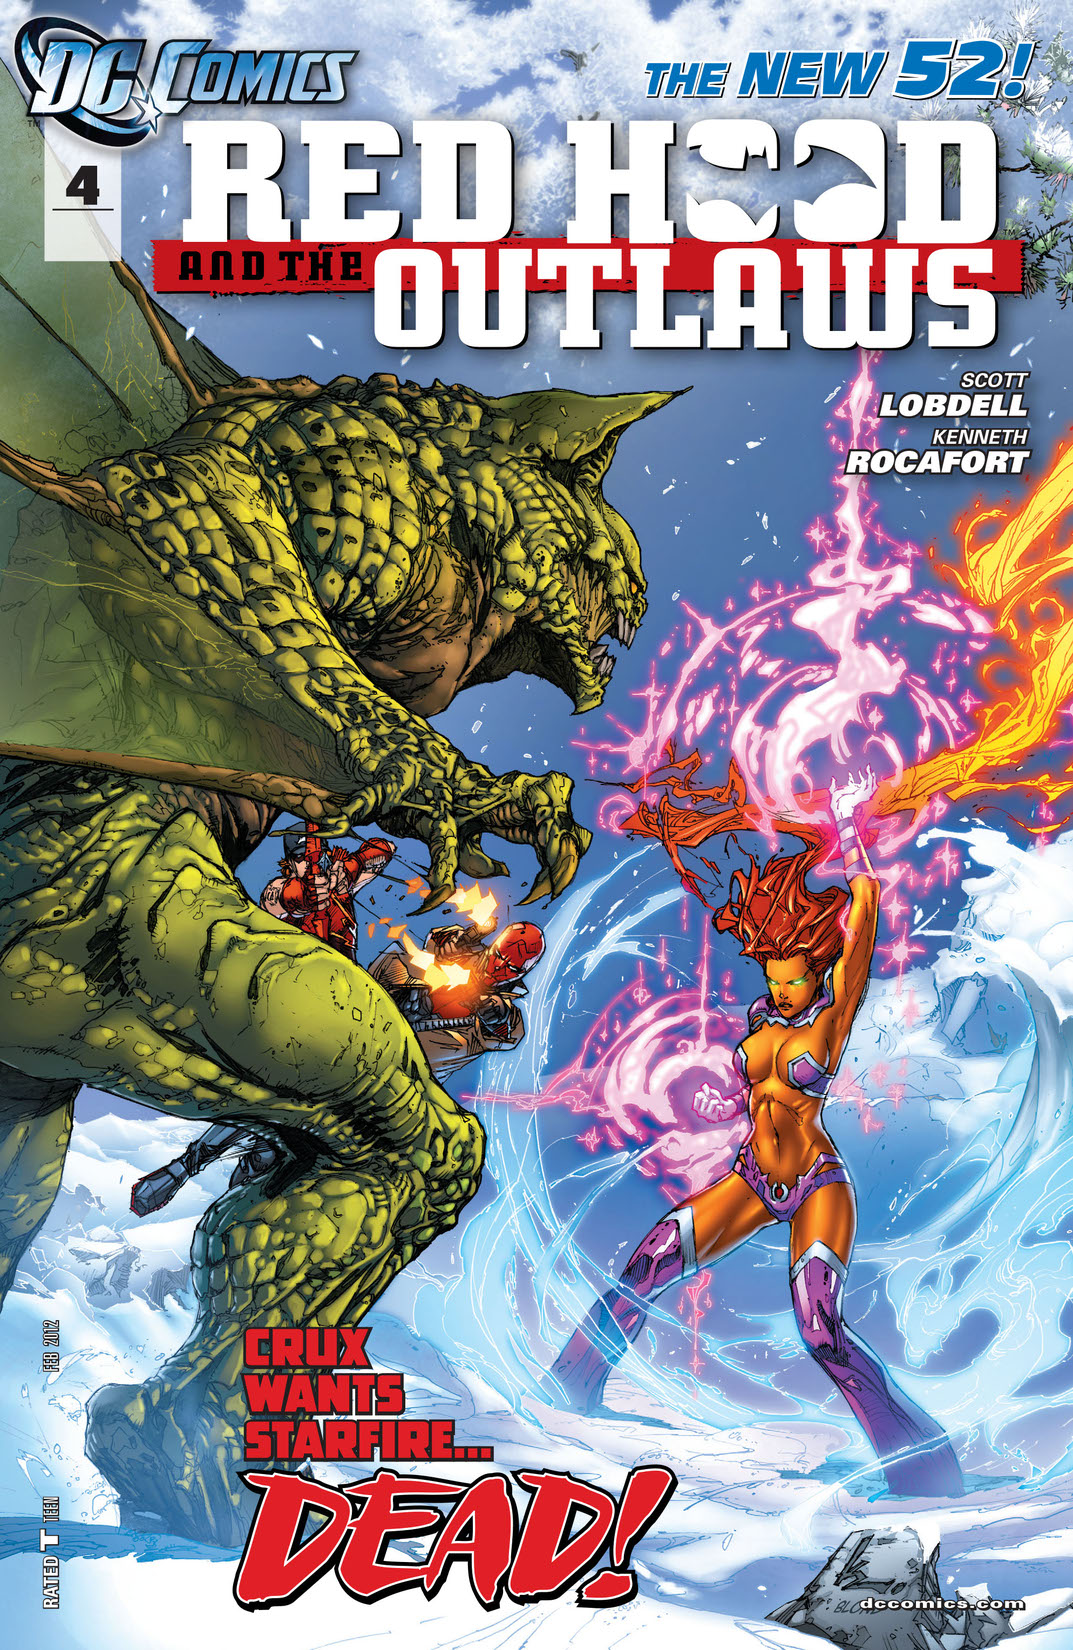 Red Hood and the Outlaws (2011-) #4 preview images